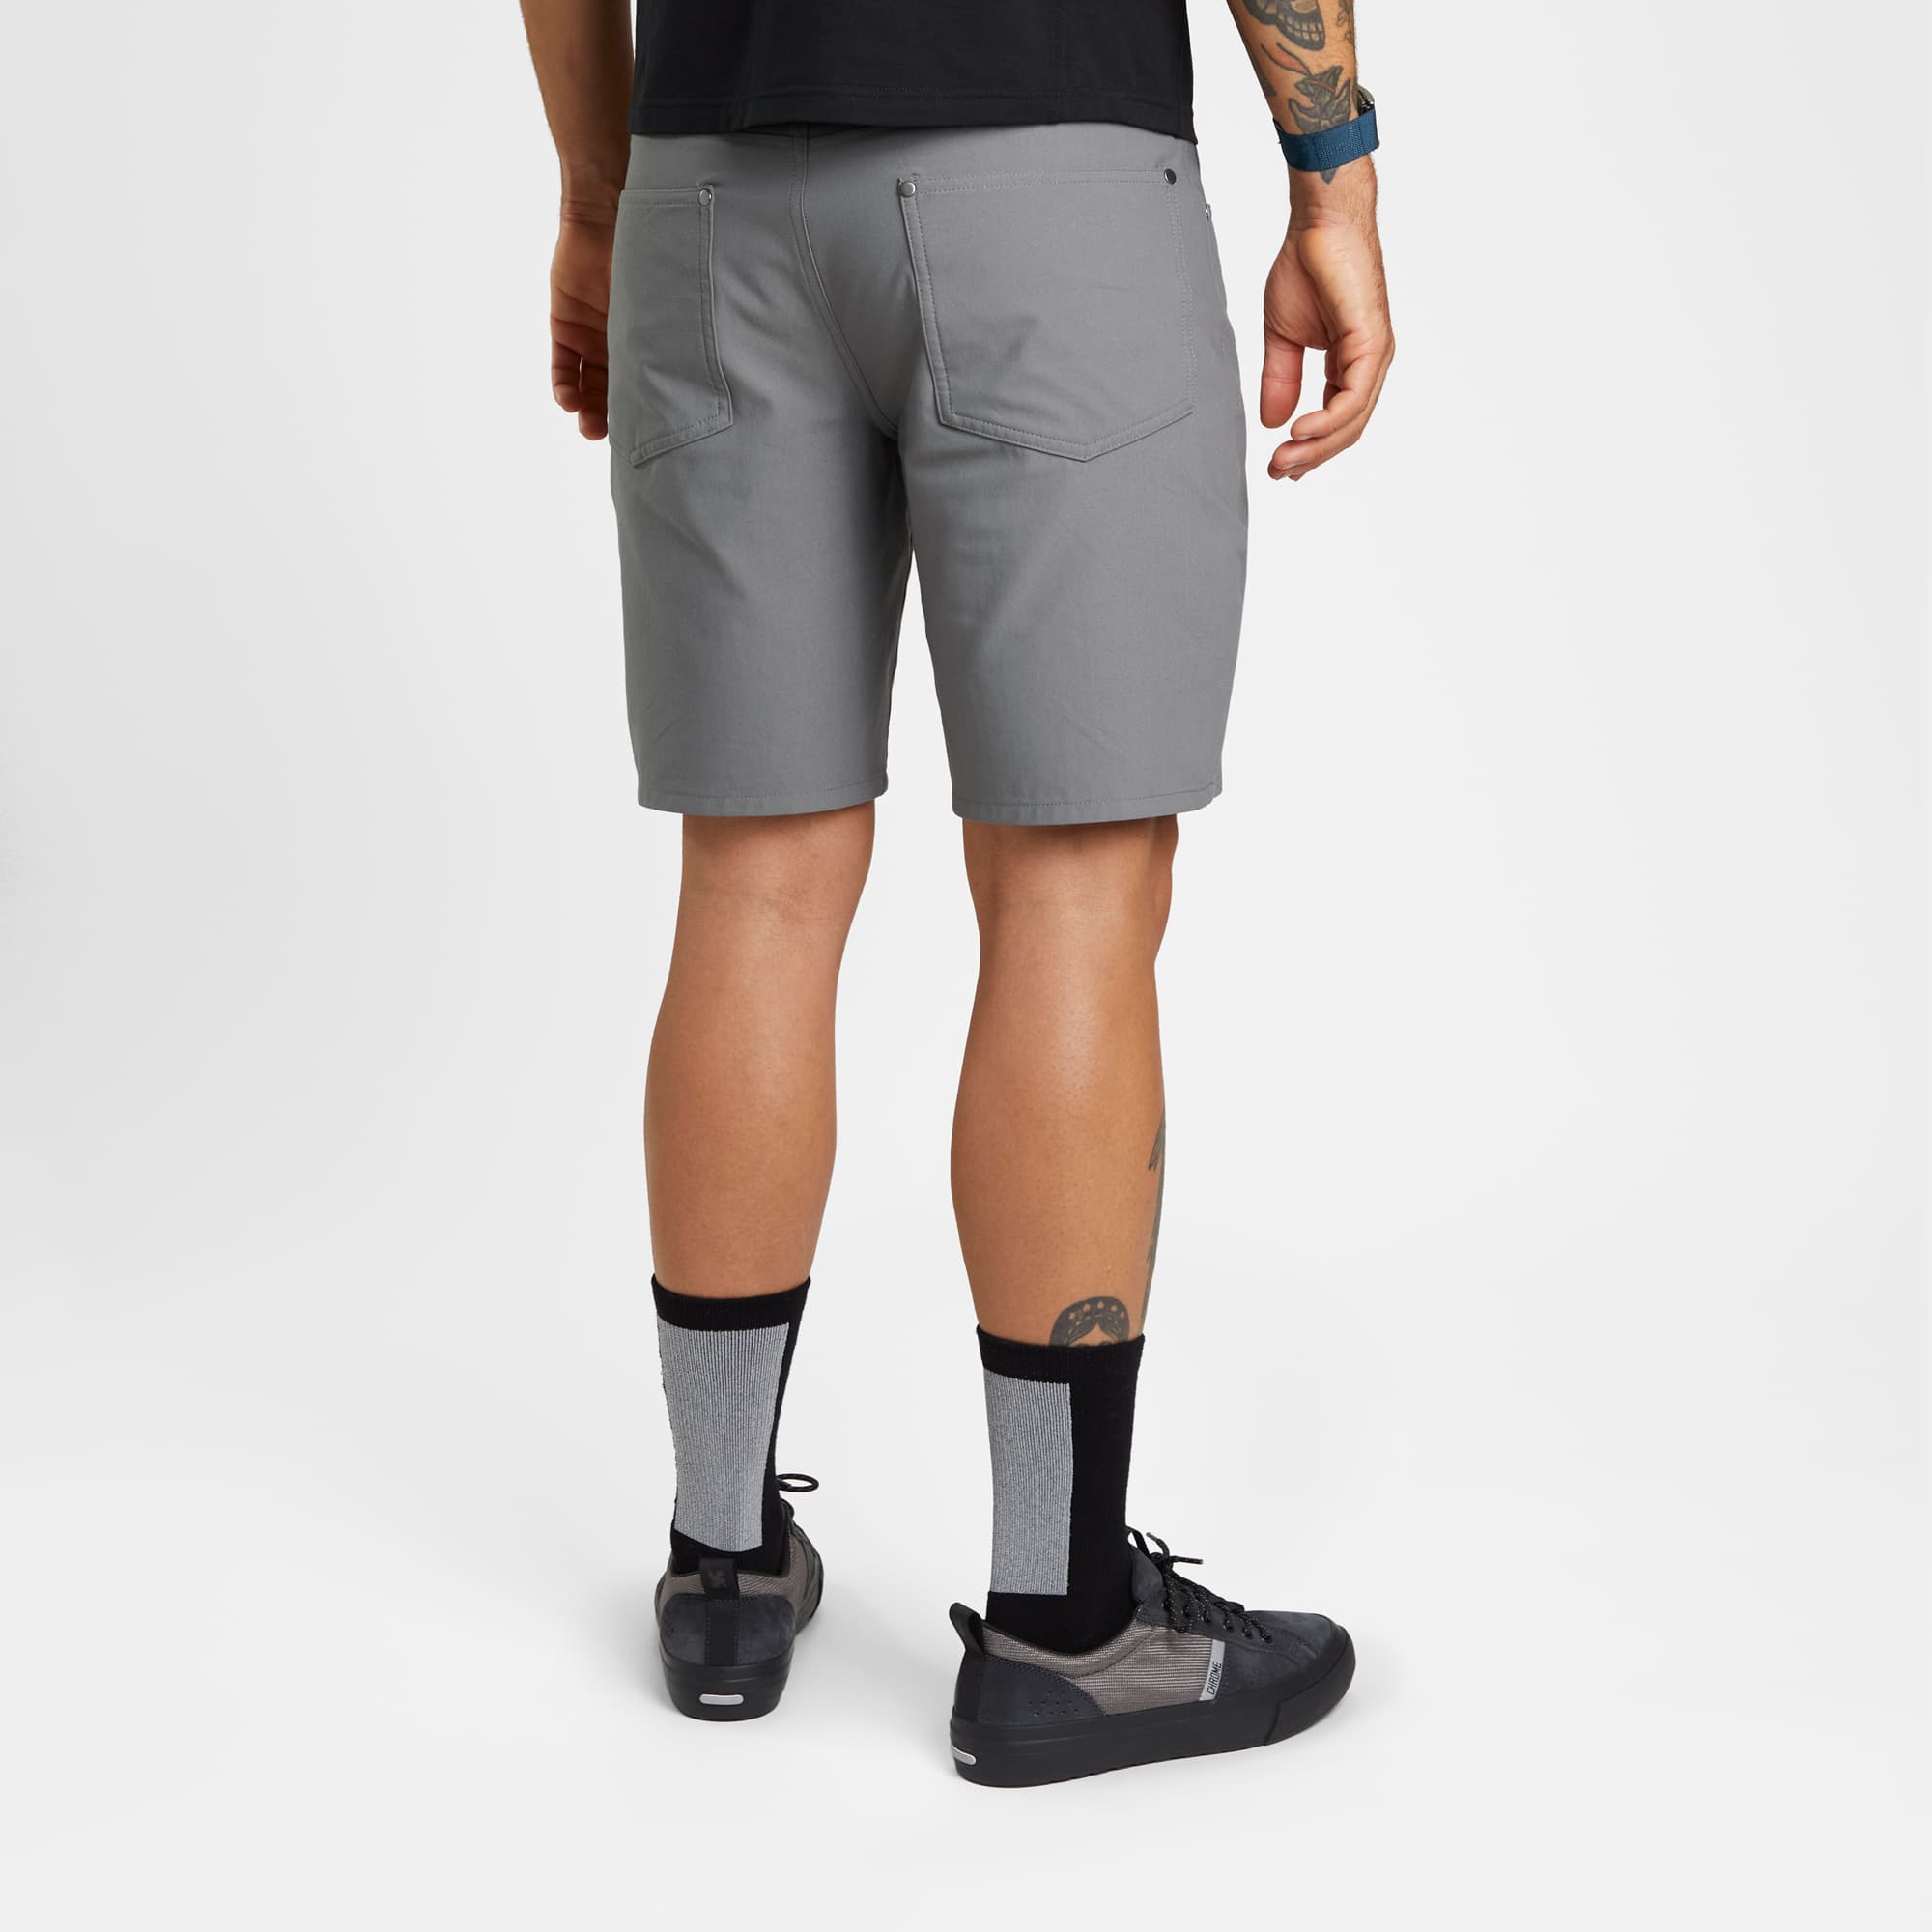 Men's Madrona tech 5-pocket short in grey worn by a man back view #color_castle rock